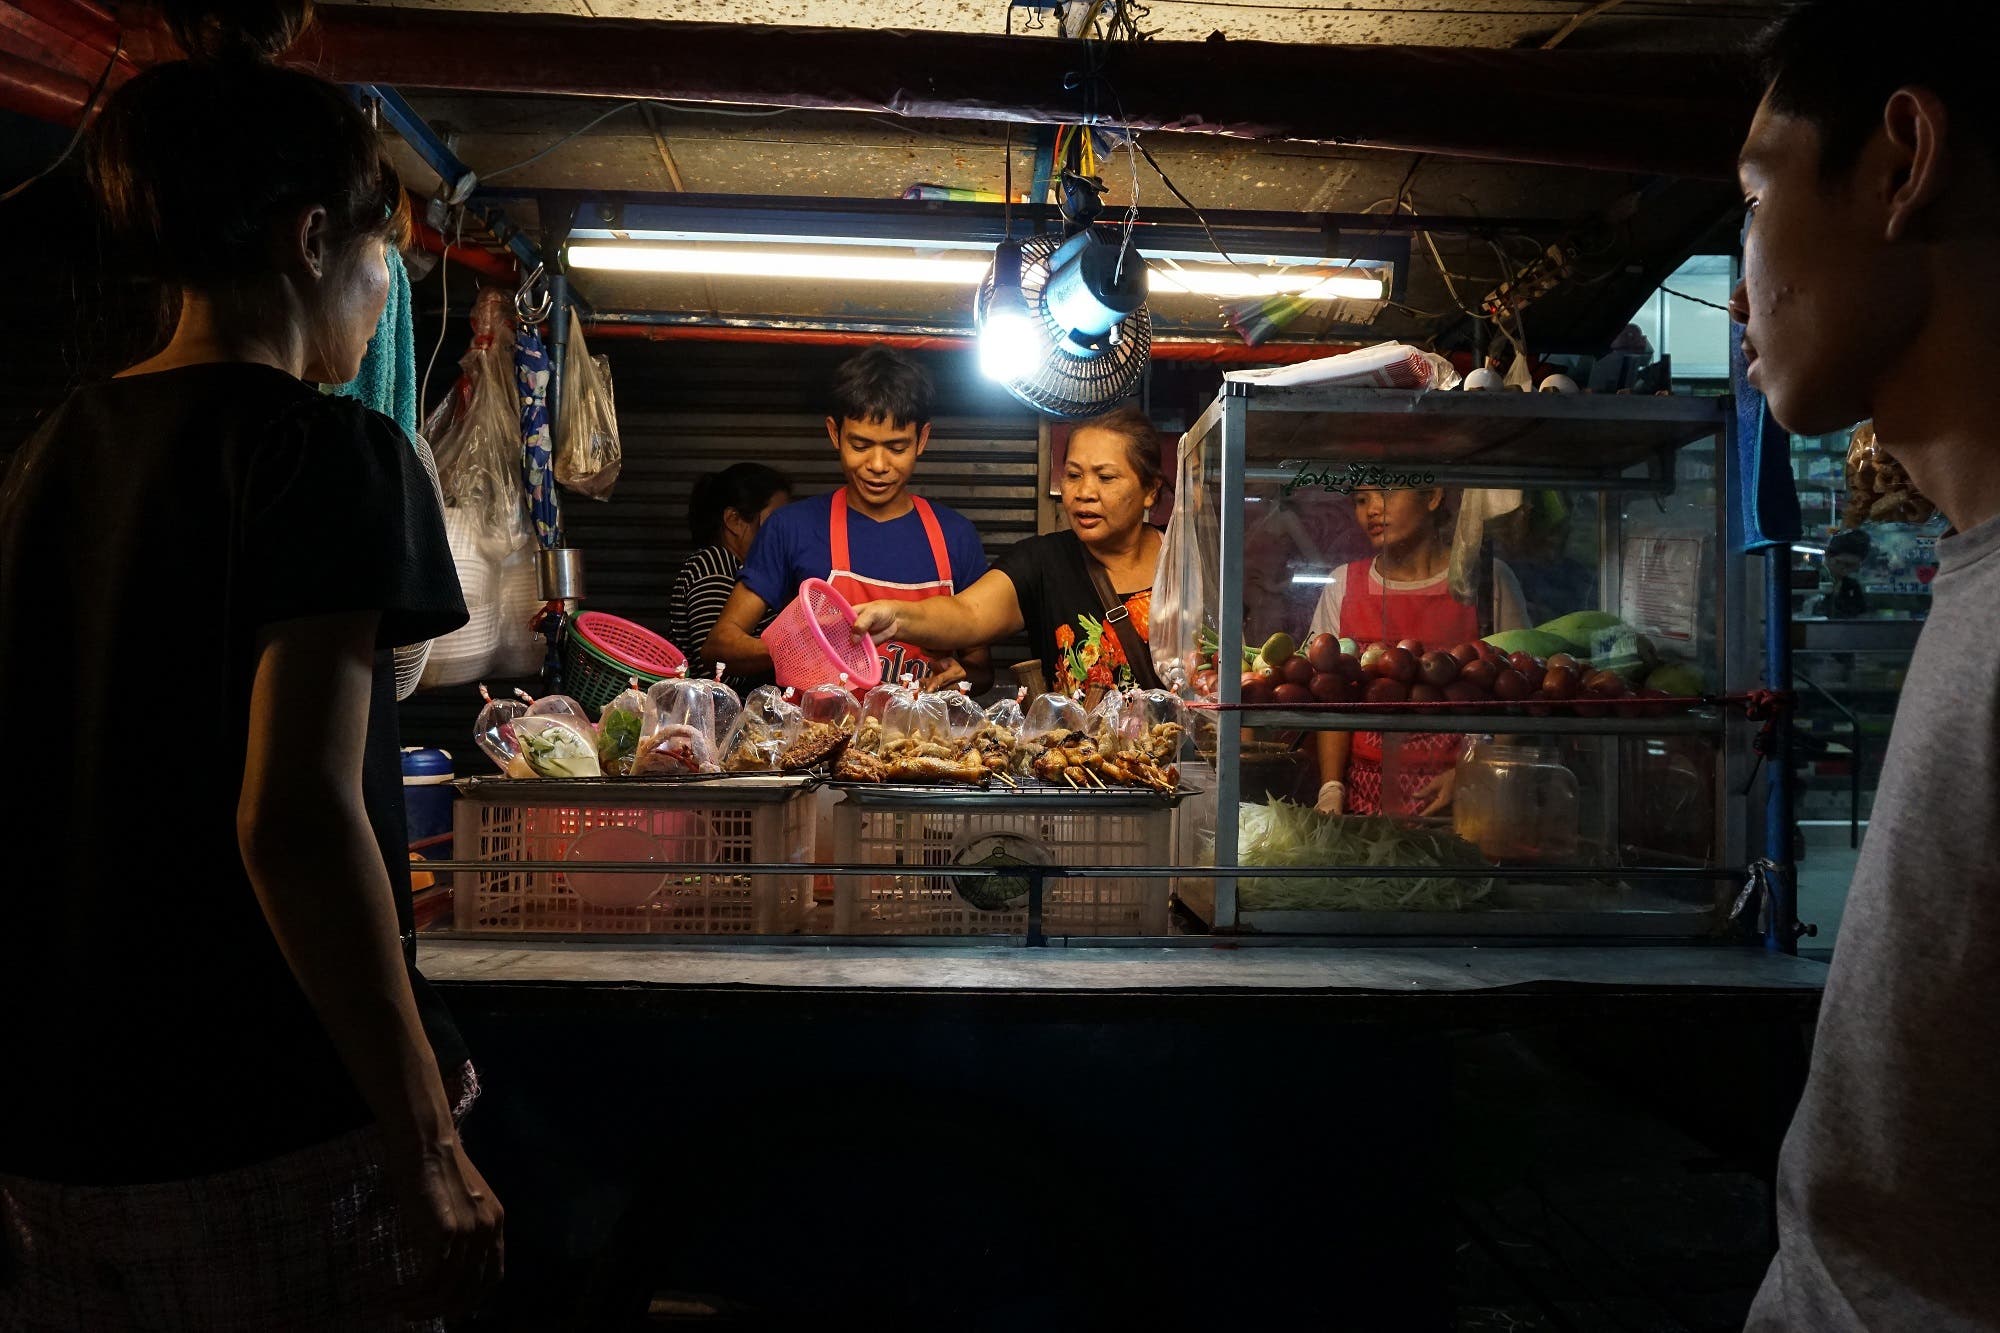 This April 17, 2017 photo shows a family preparing food for customers at a street food stall in the Phrakanong district of Bangkok. (AFP)